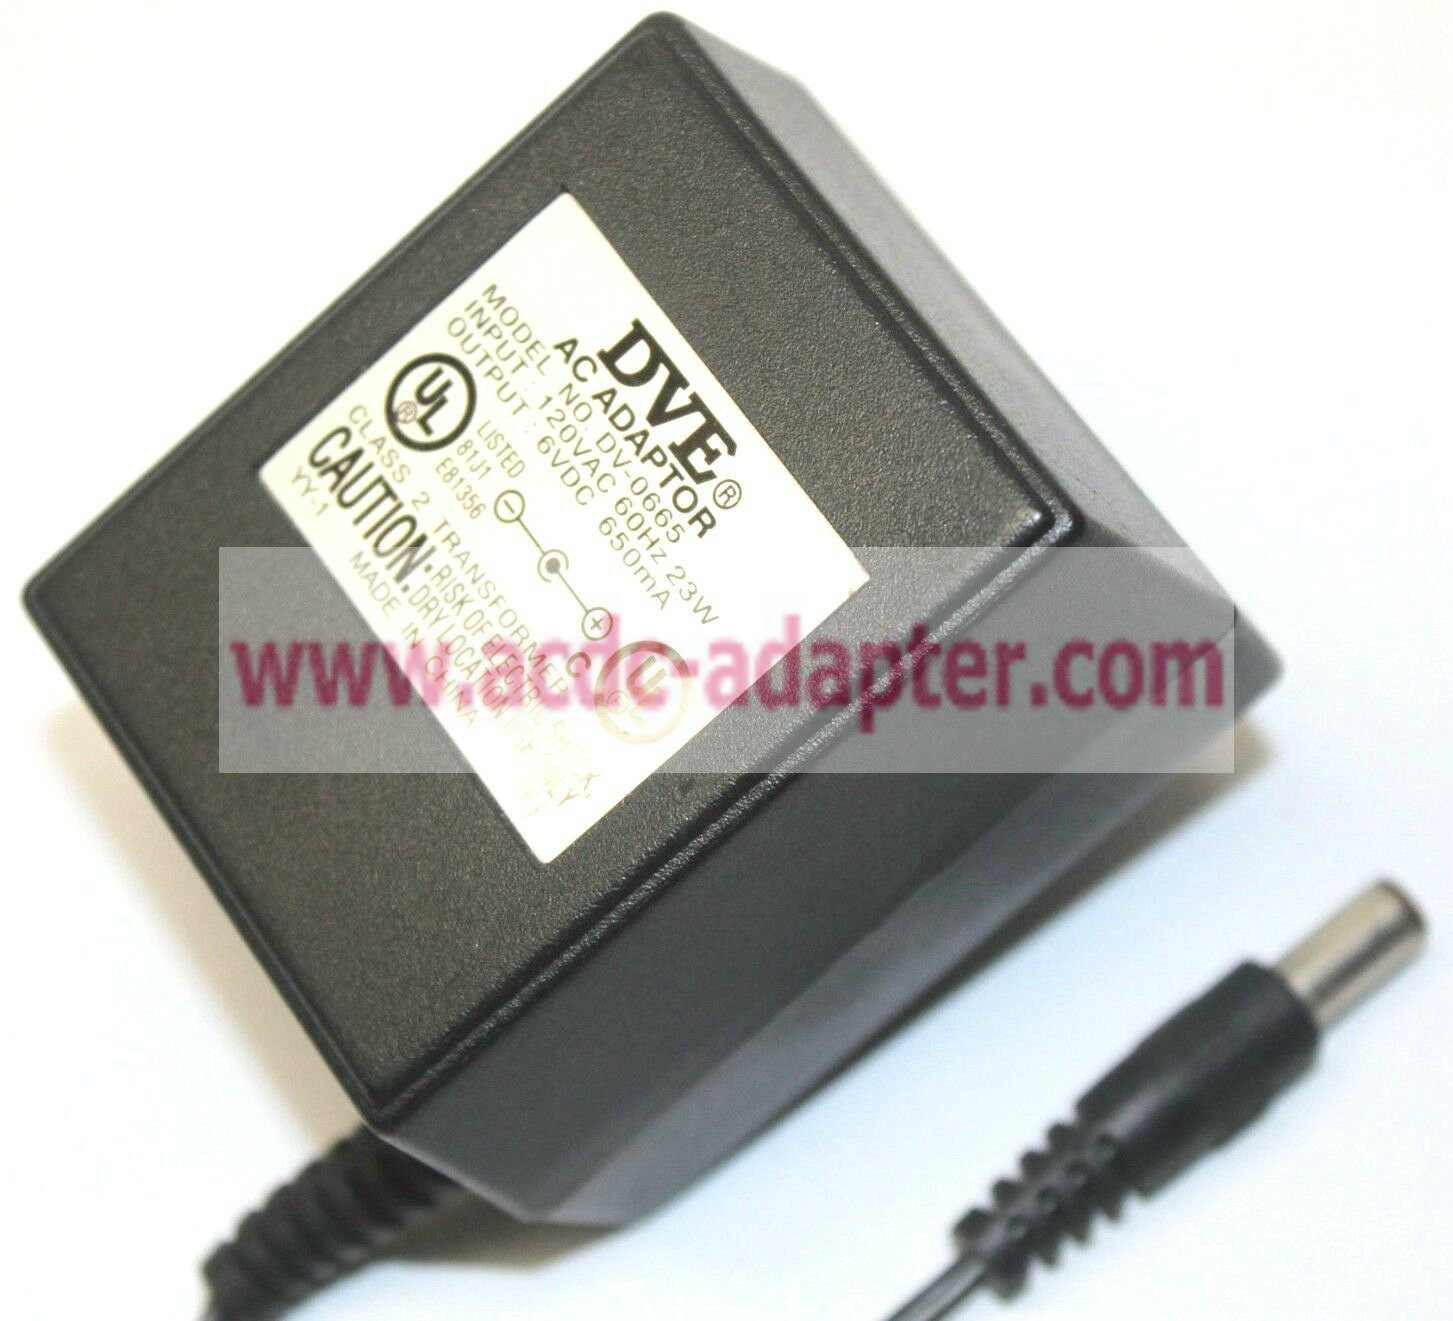 Genuine DVE DV-0665 6Volts 650mA AC/DC Adapter Power Supply Charger Class 2 Transf